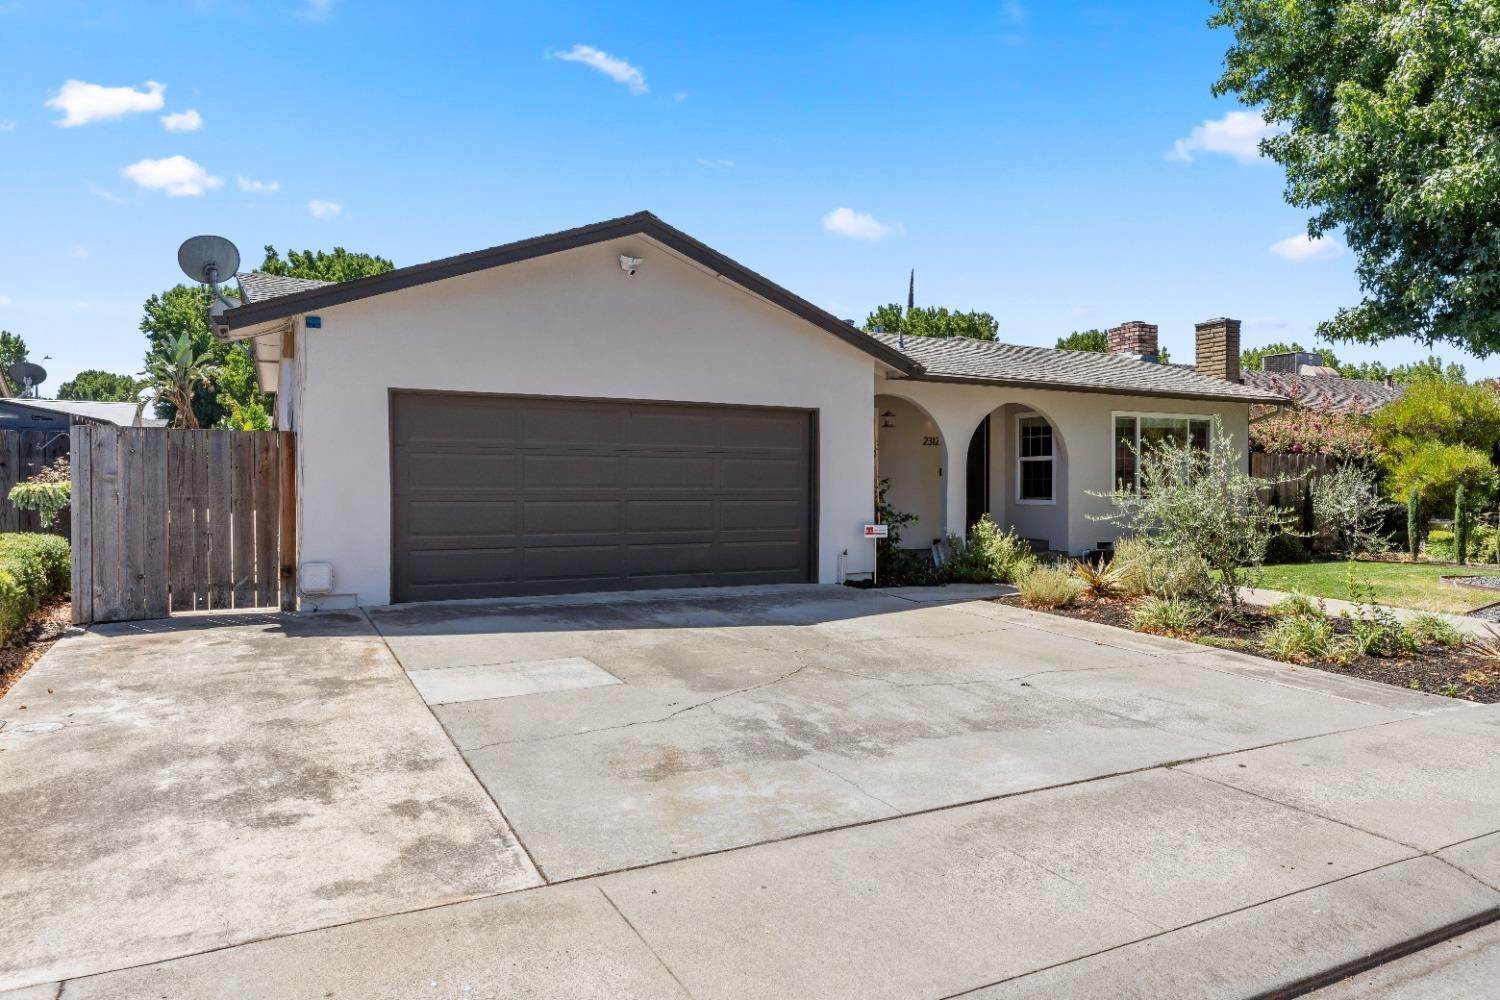 2. Single Family Homes for Active at 2312 Mcritchie Way Modesto, California 95355 United States